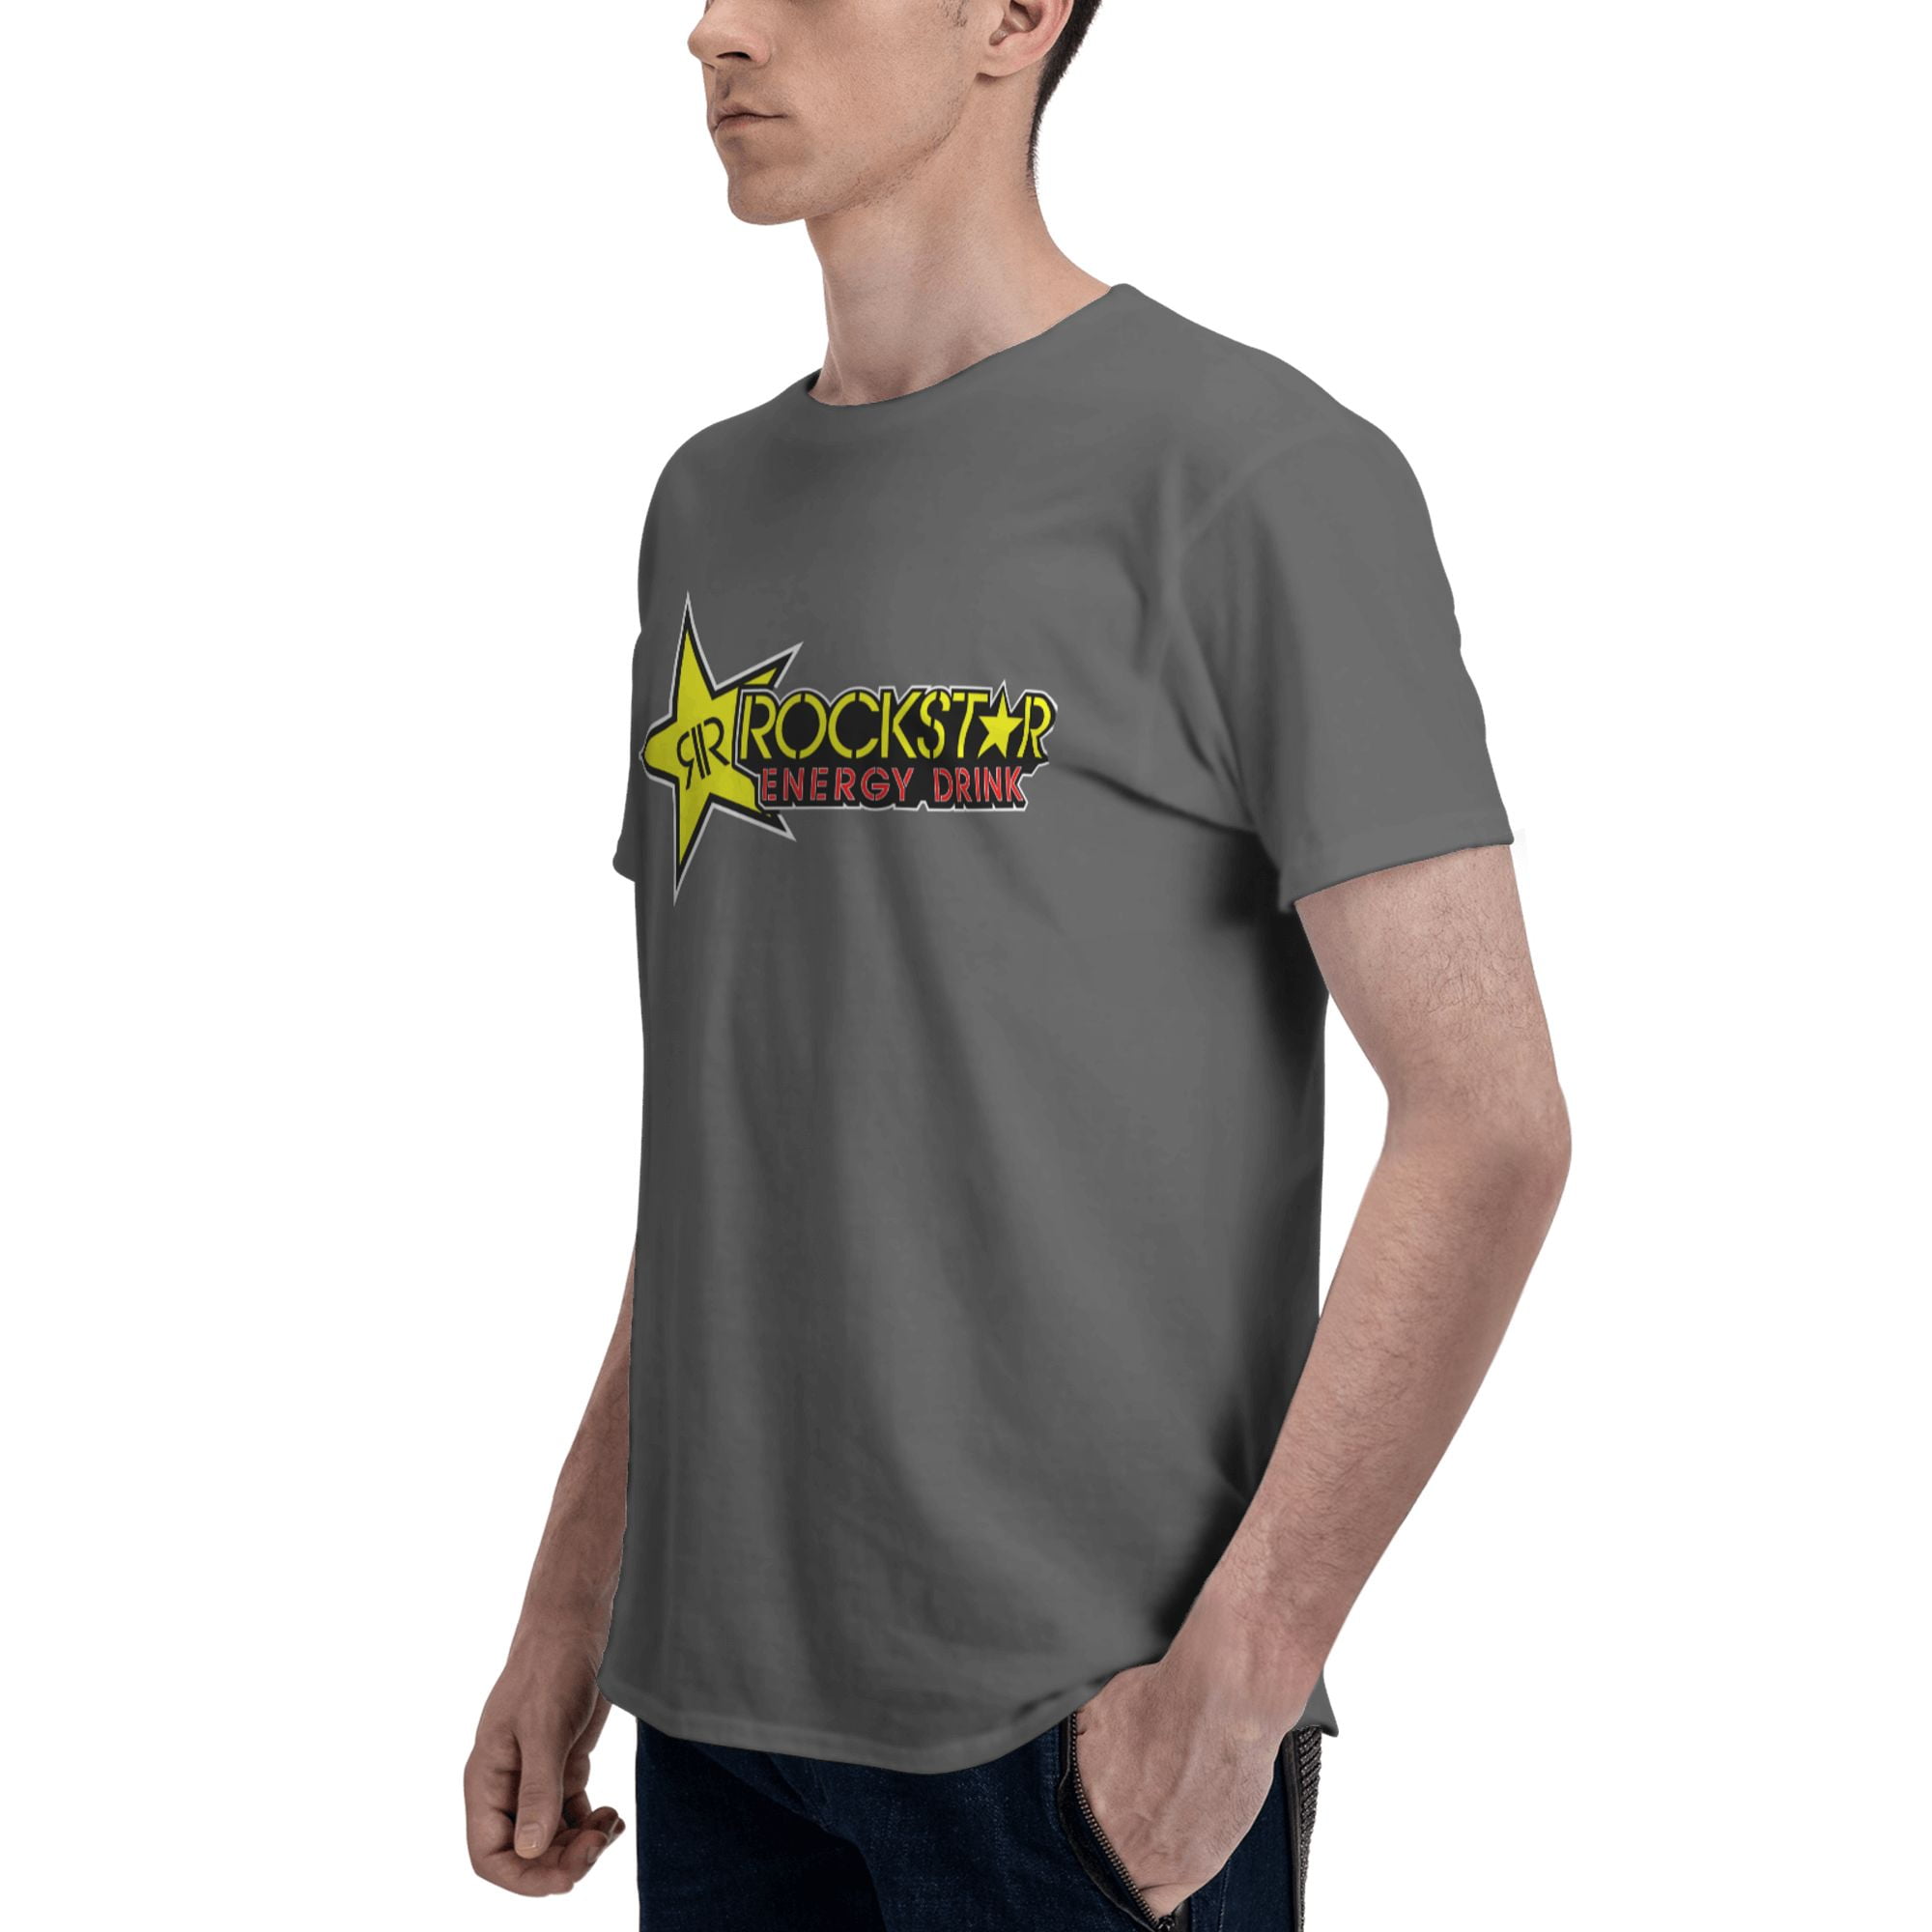 ROCKSTAR MADE Essential T-Shirt for Sale by narciststore